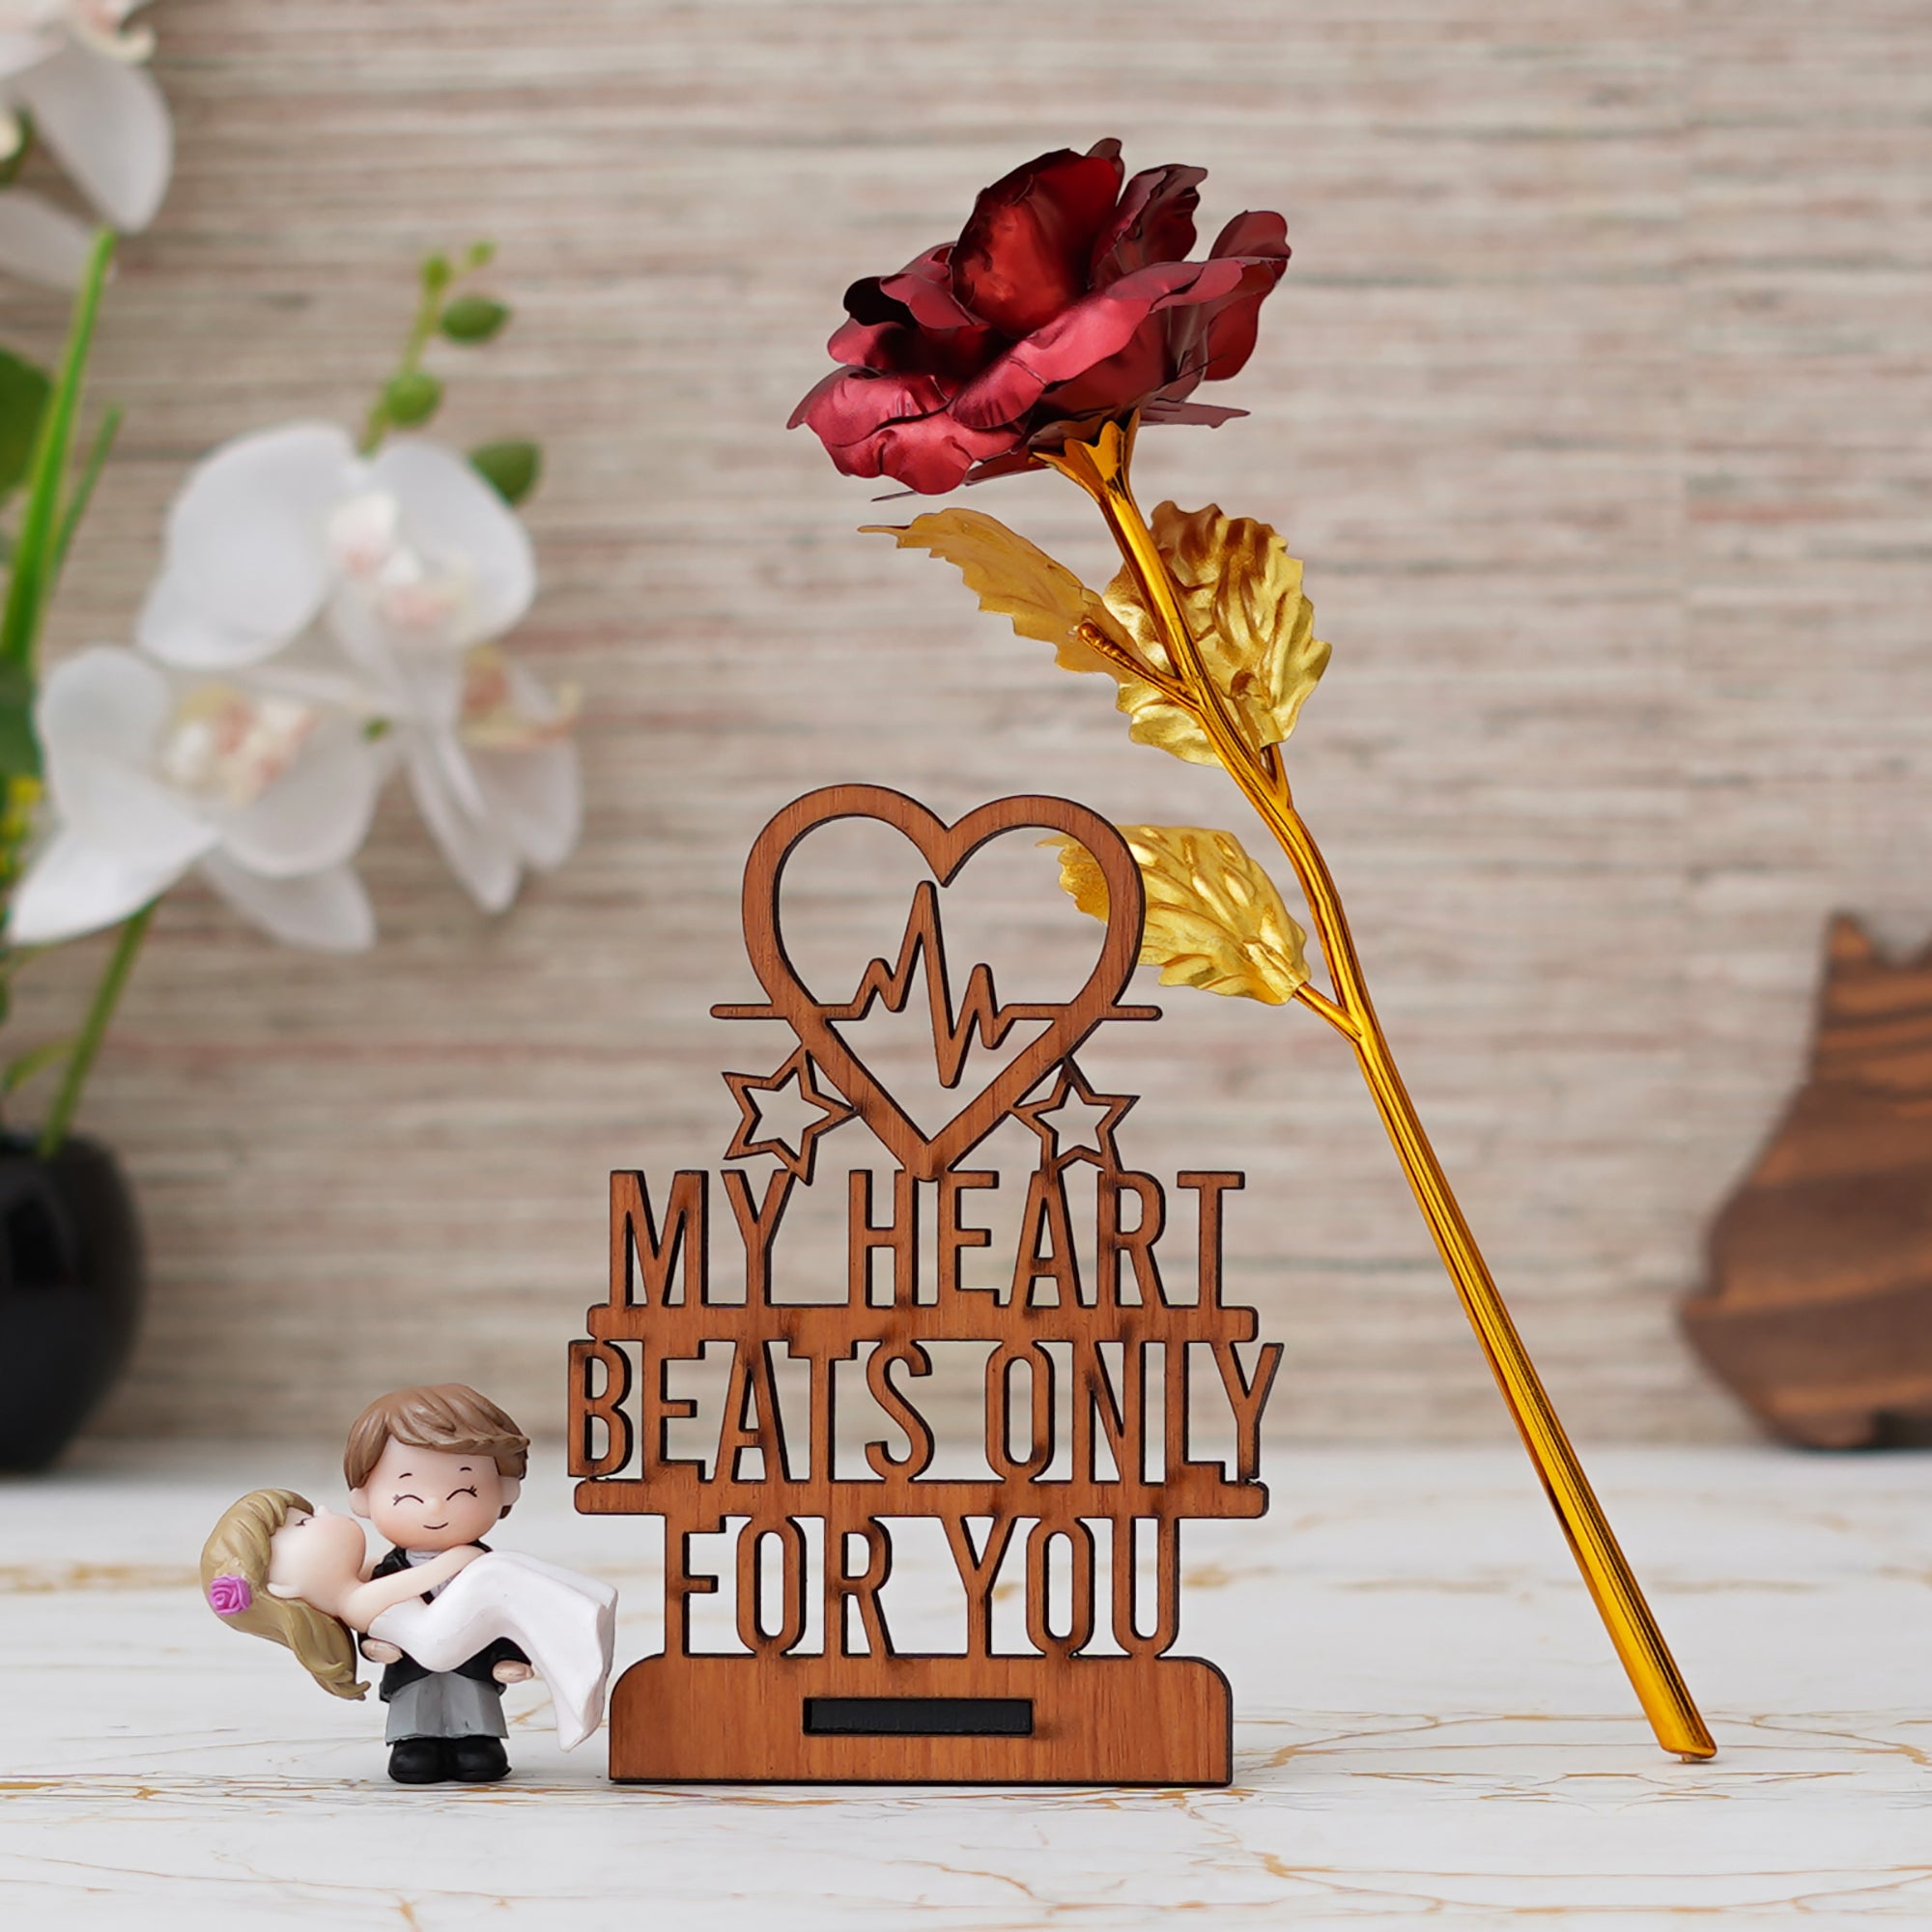 Valentine Combo of Golden Red Rose Gift Set, "My Heart Beats Only For You" Wooden Showpiece With Stand, Bride Kissing Groom Romantic Polyresin Decorative Showpiece